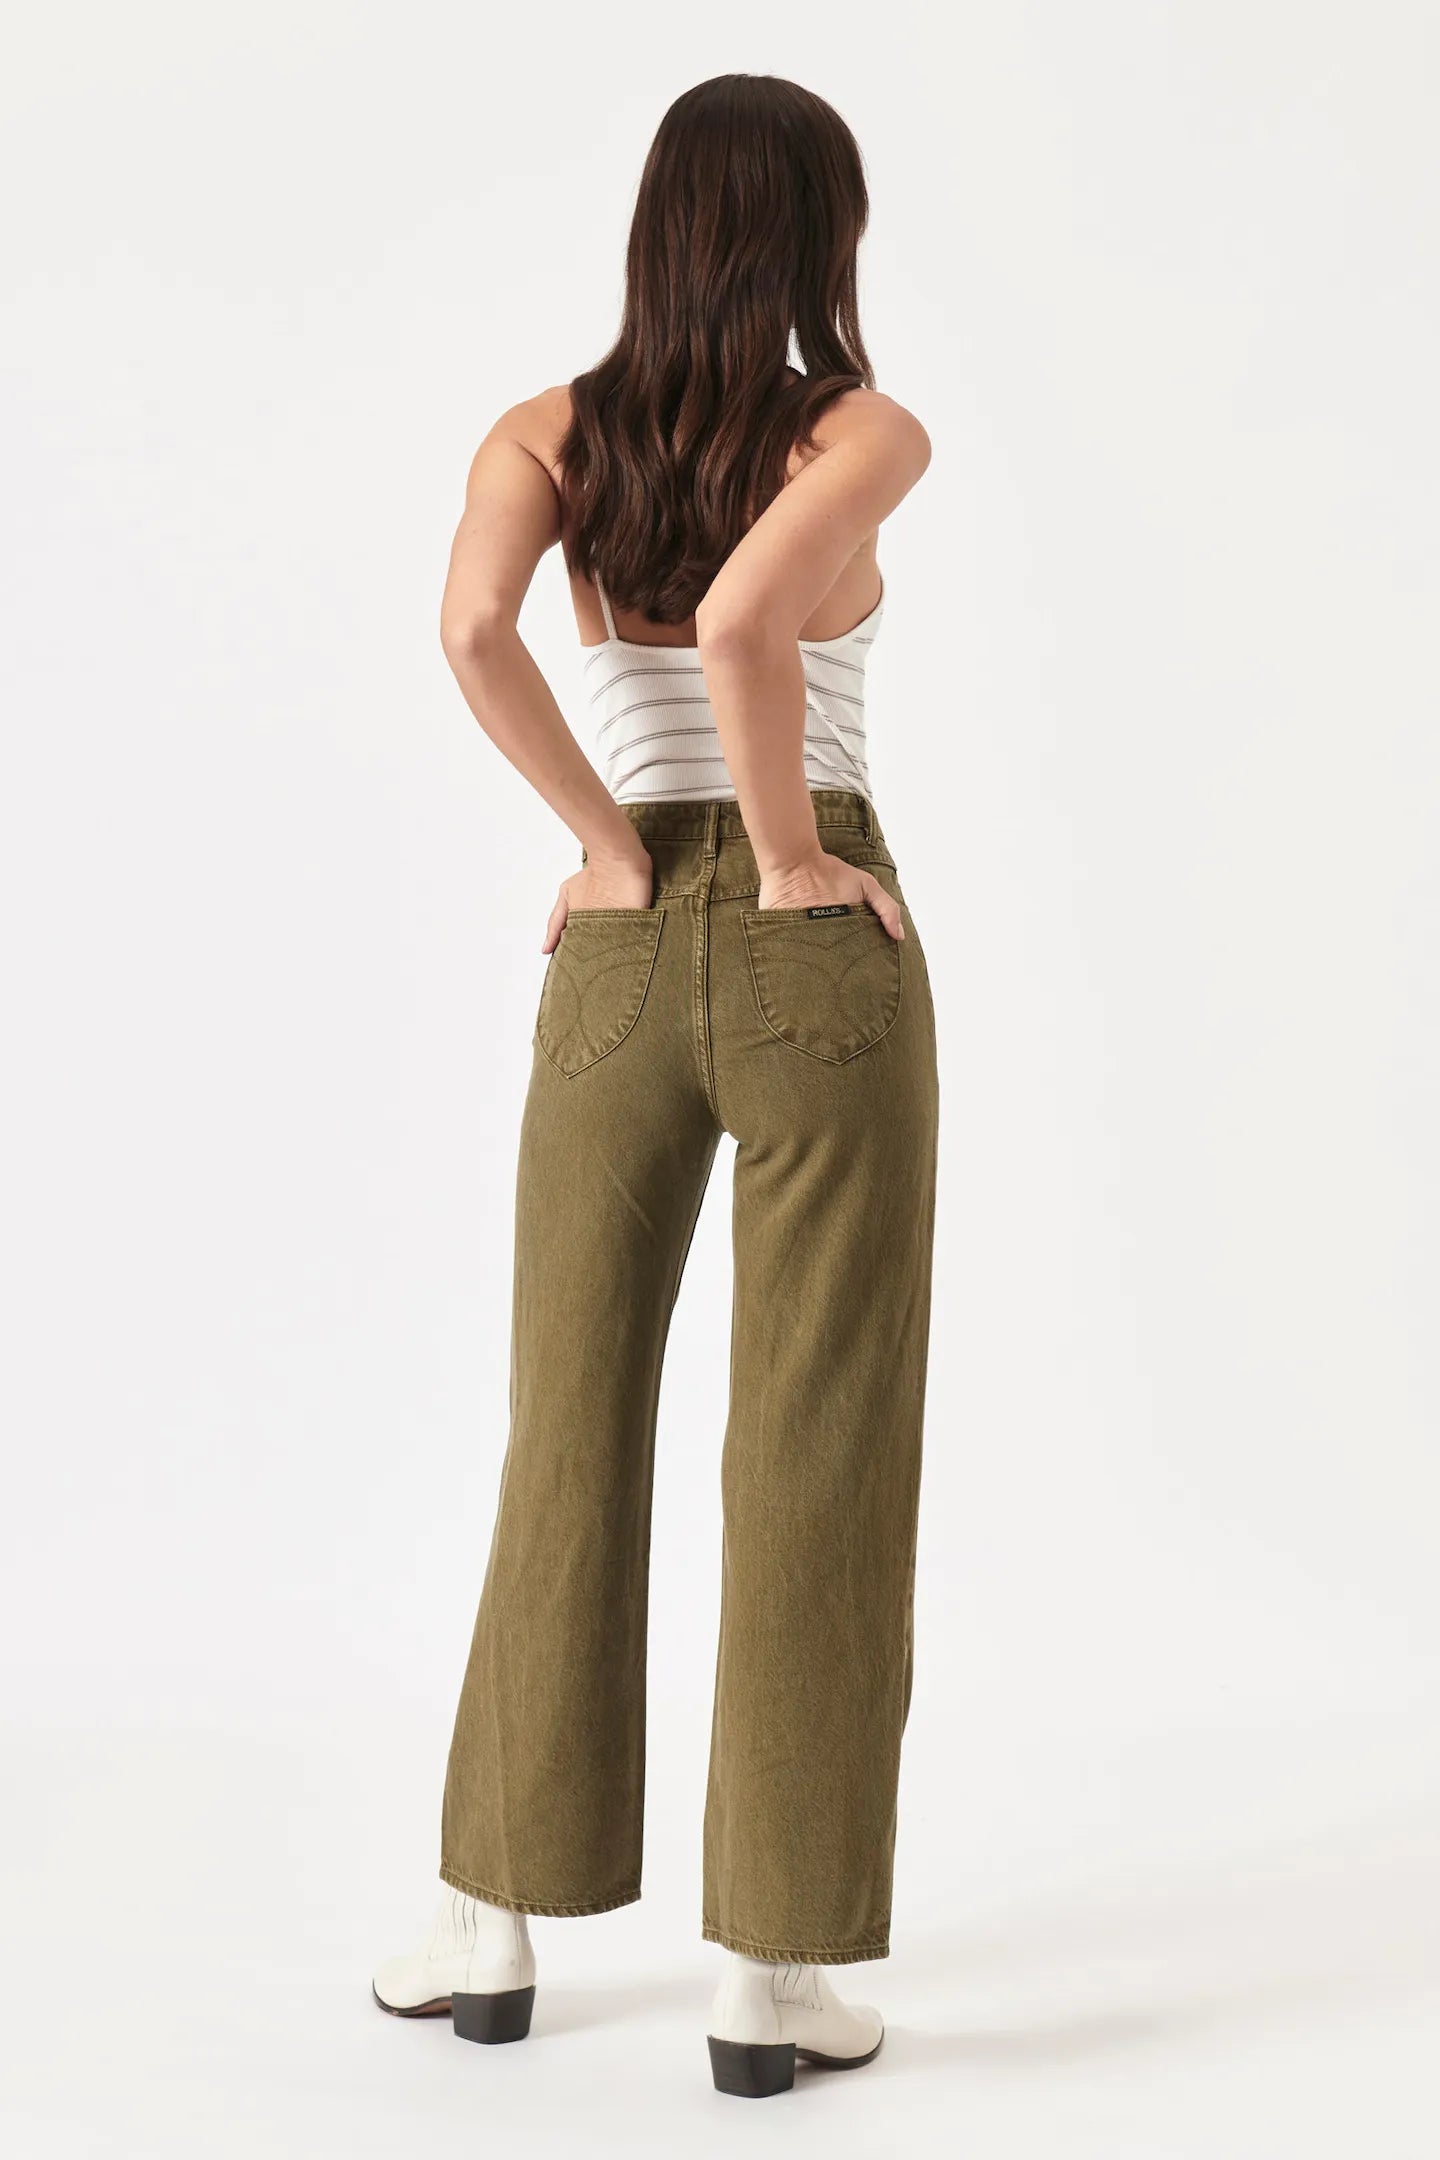 ROLLAS // Heidi Jeans Ankle LYOCELL ARMY GREEN